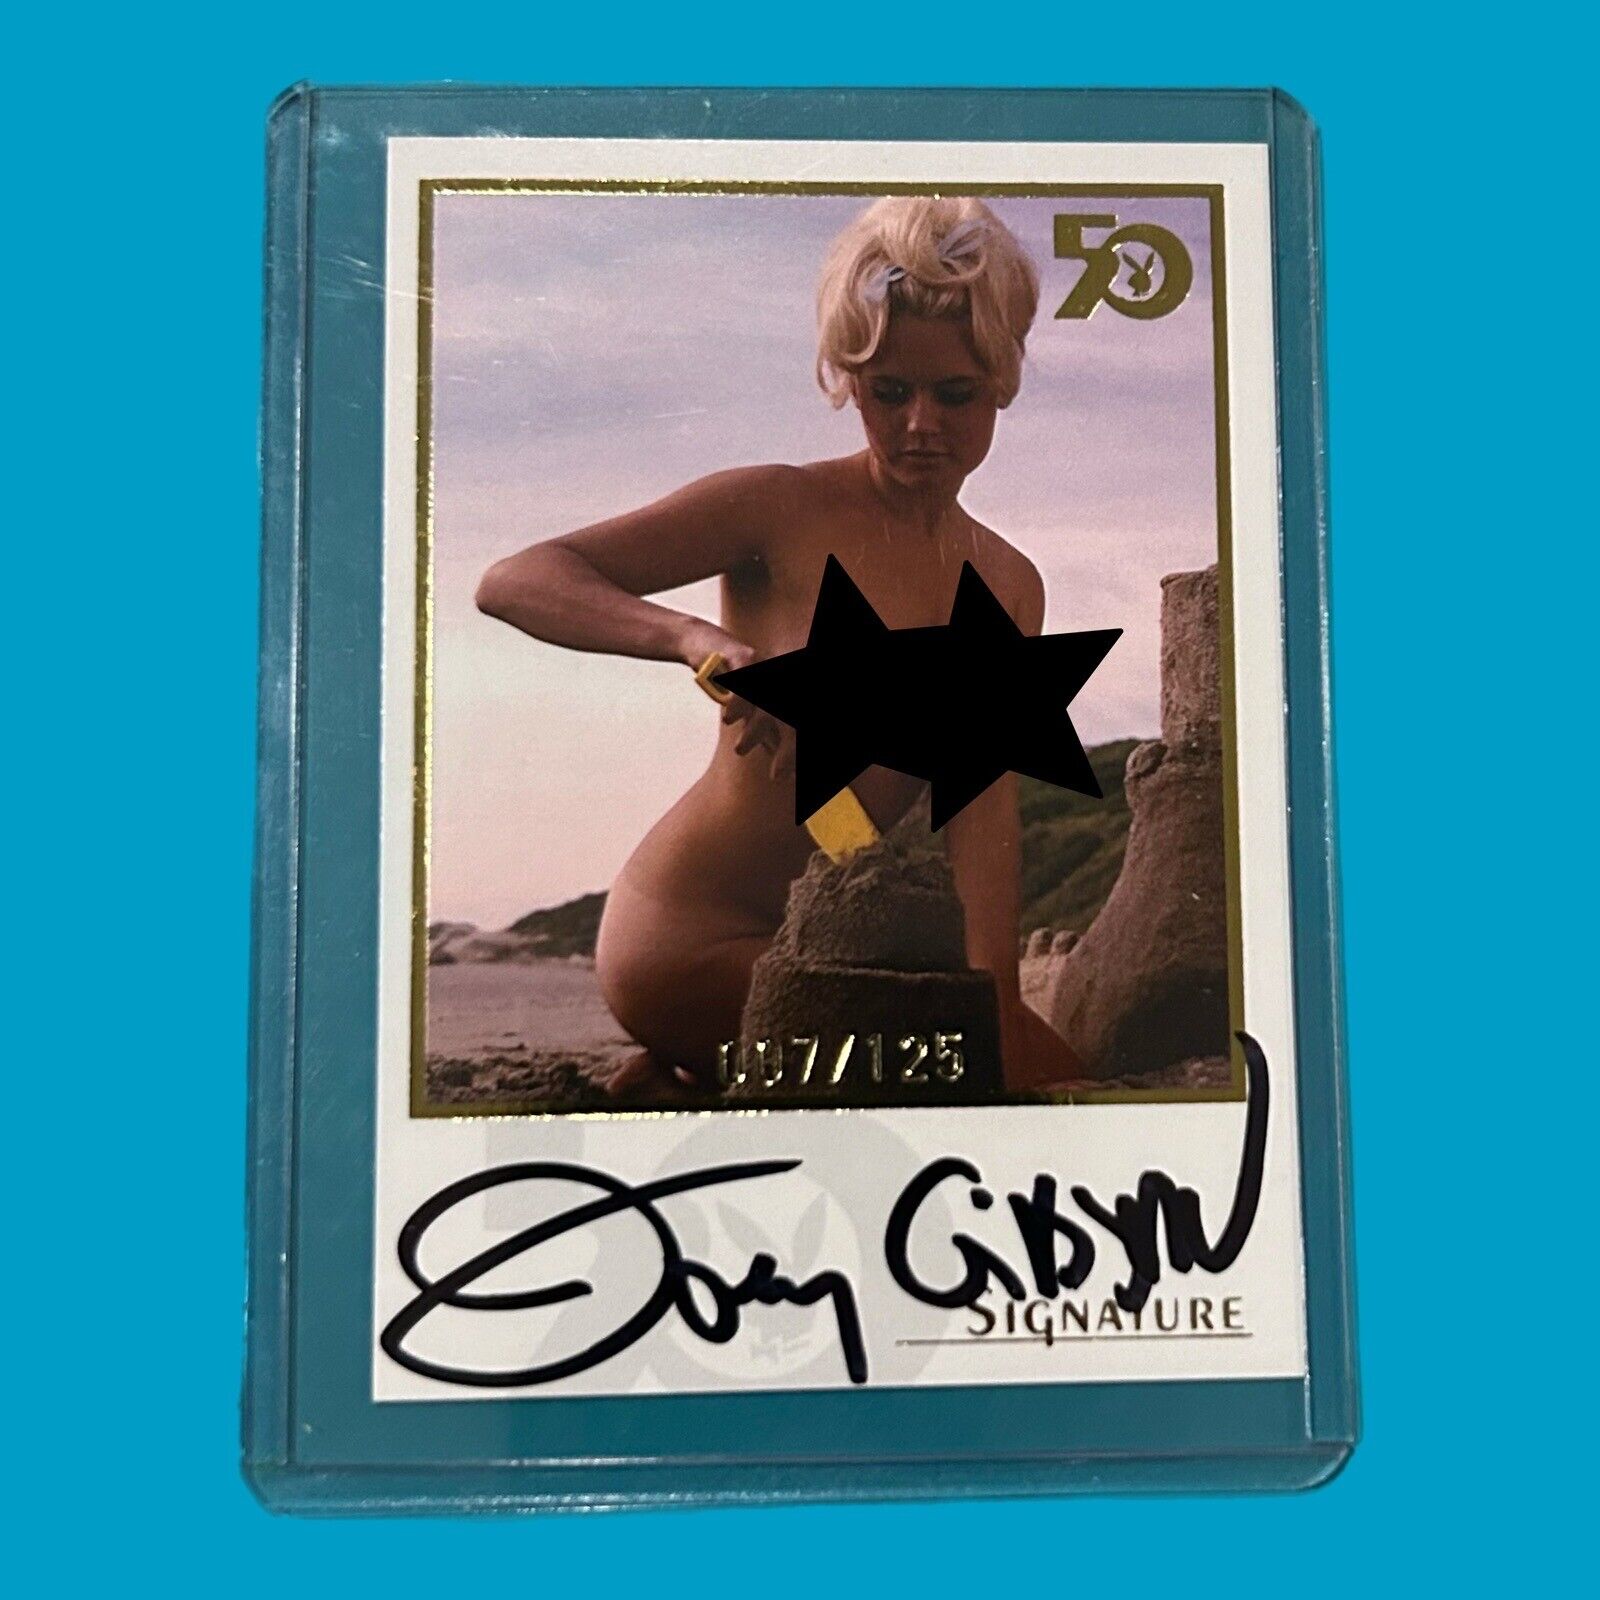 2005 Playboy\'s 50th Anniversary Joey Gibson Autographed Card #7/125